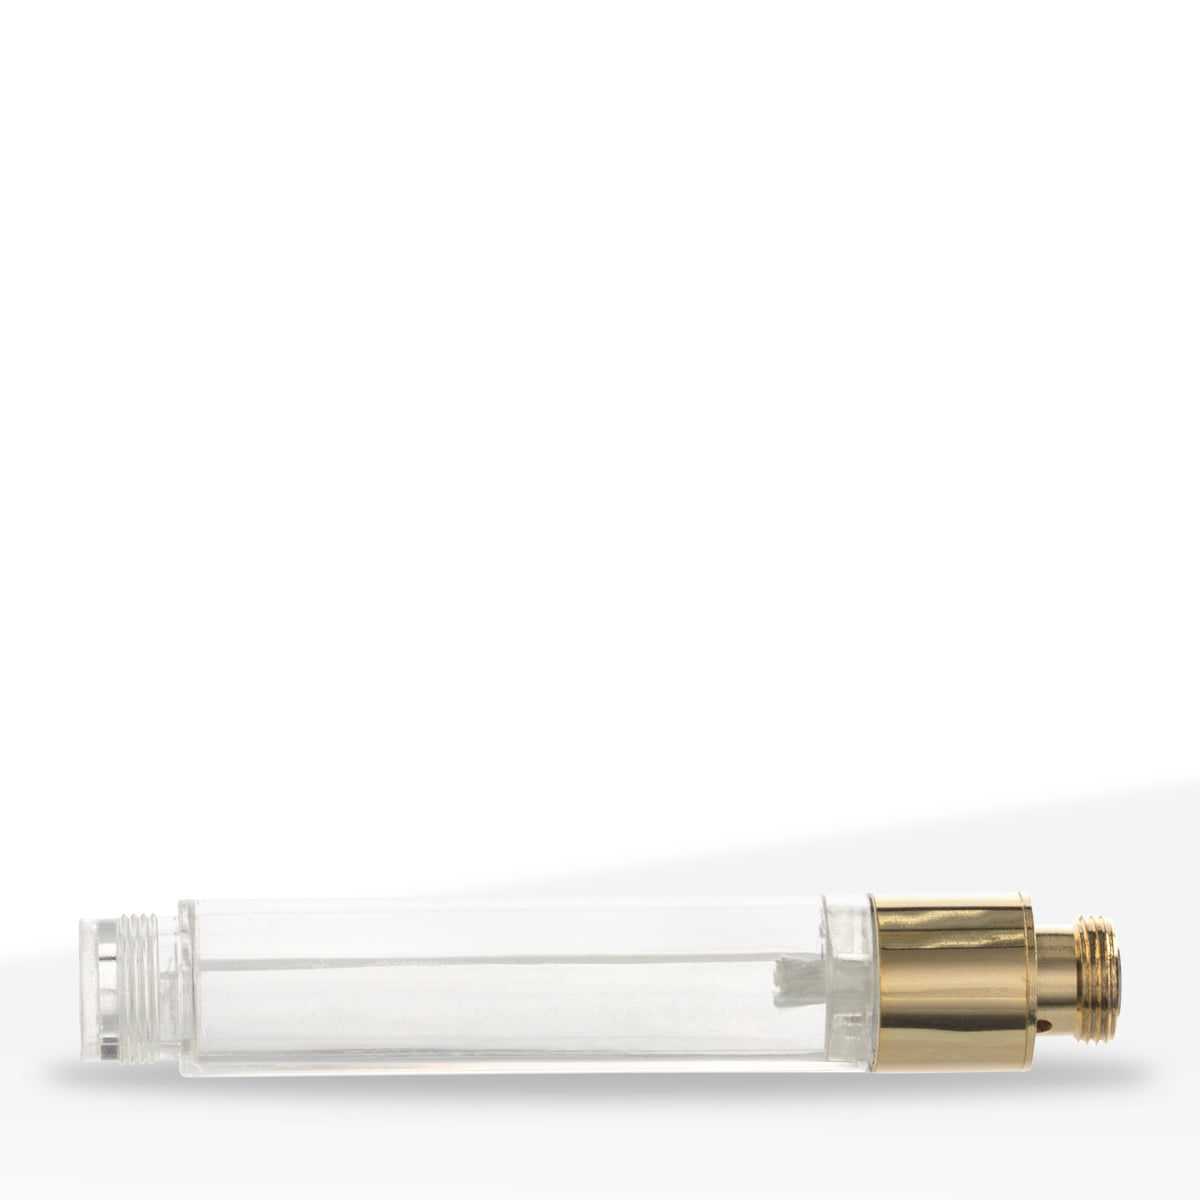 Buttonless Vaporizer Cartridge 1ml Round Mouth Gold - 100 Count